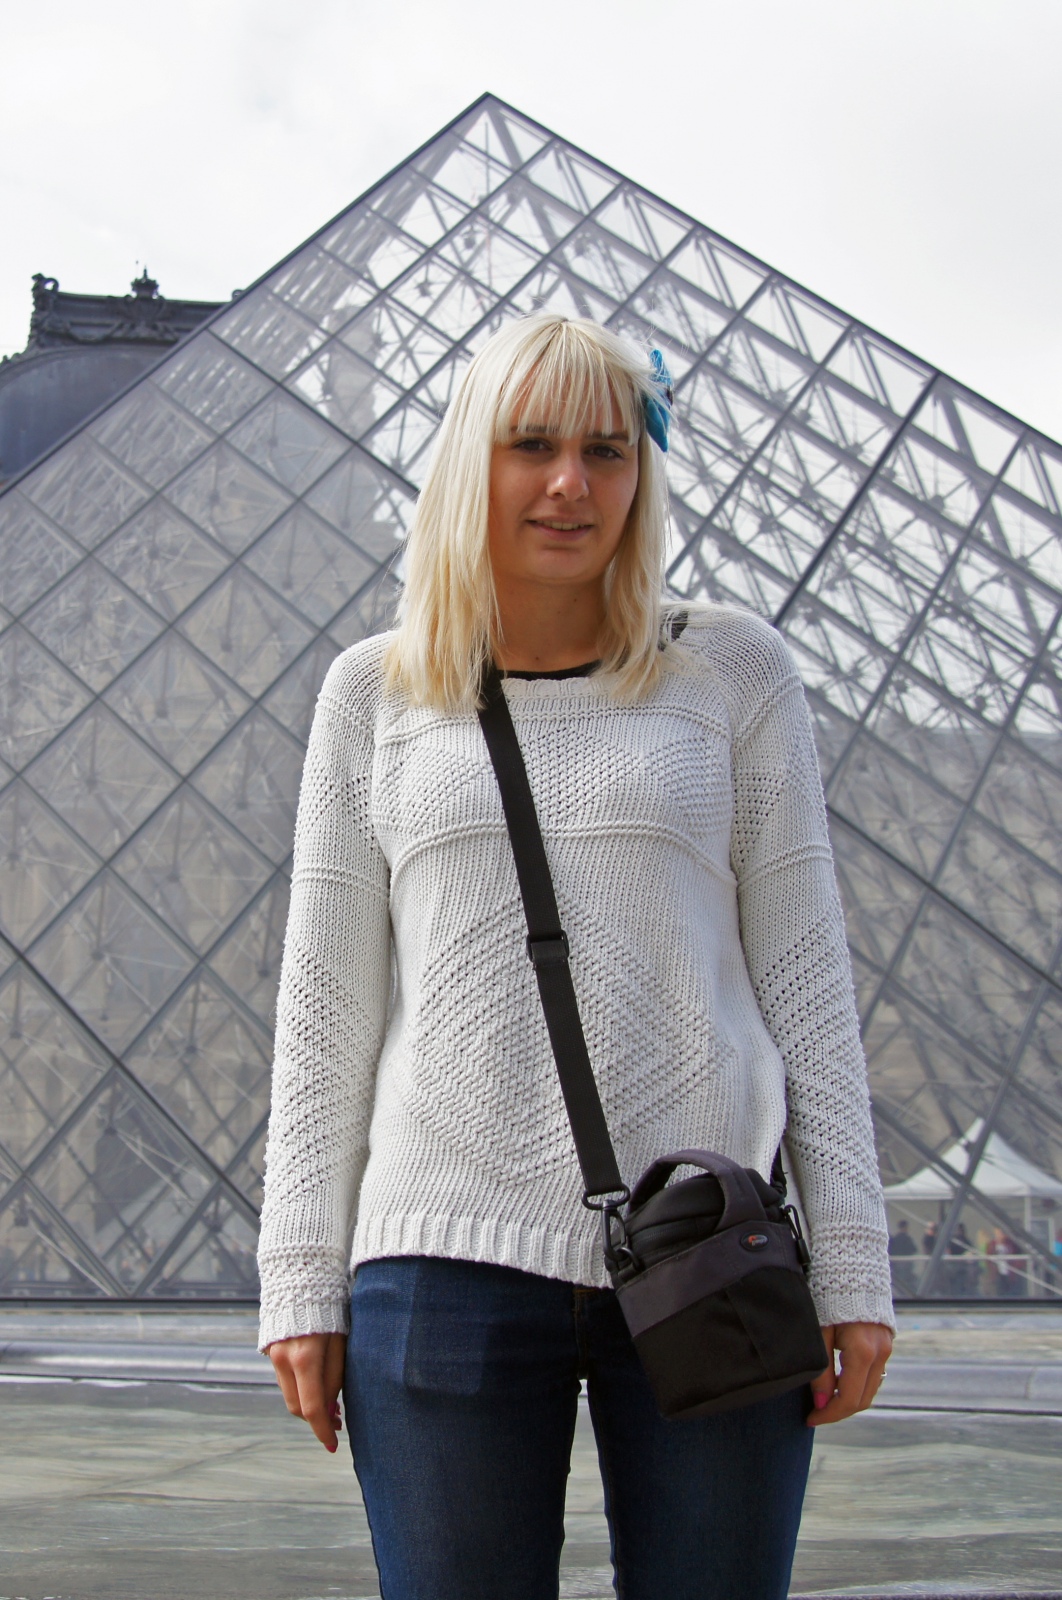 Lisa and the Glass Pyramids at The Louvre